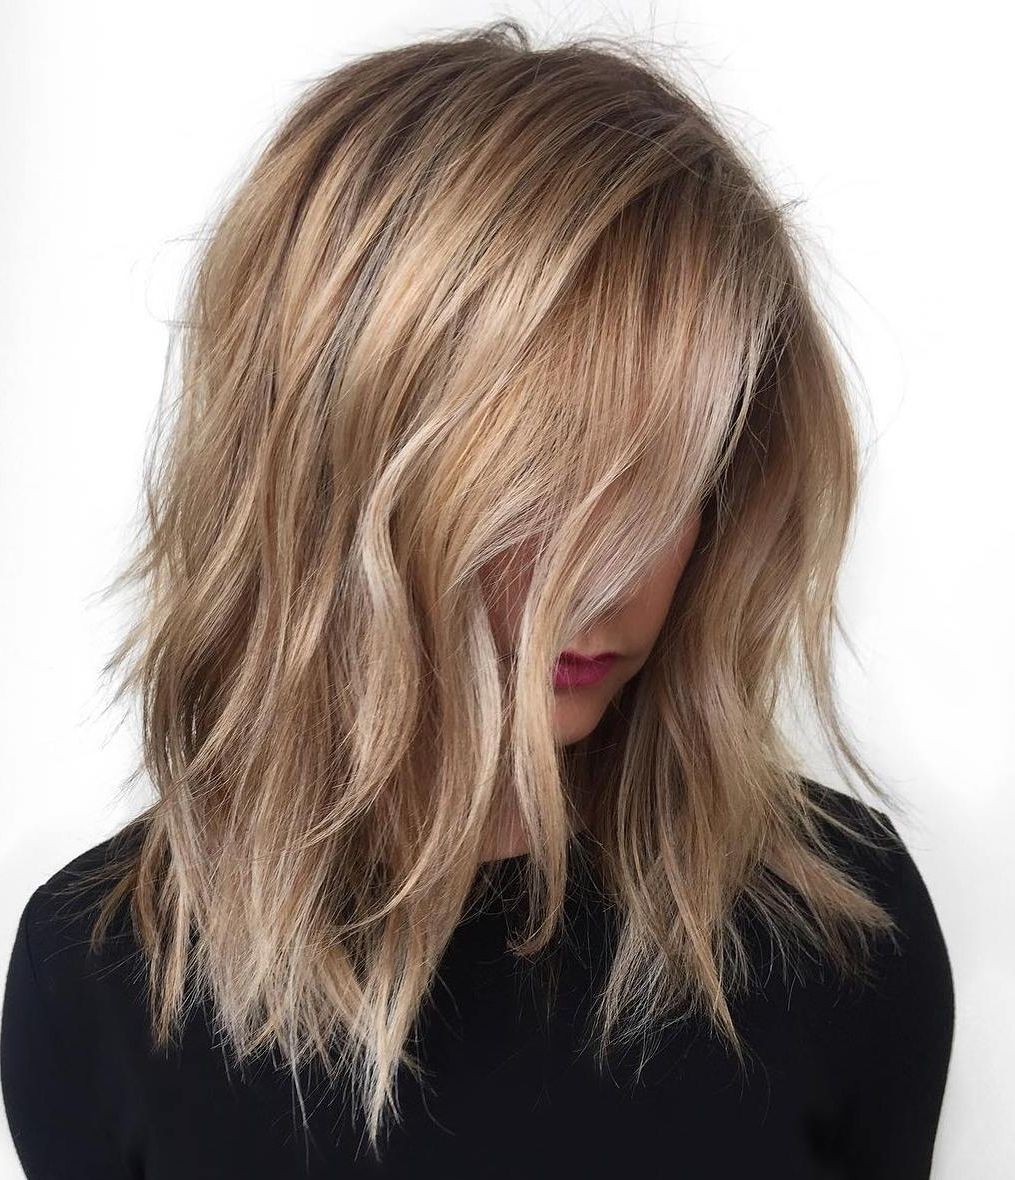 40 Styles With Medium Blonde Hair For Major Inspiration For 2017 Shaggy Fade Blonde Hairstyles (View 9 of 20)